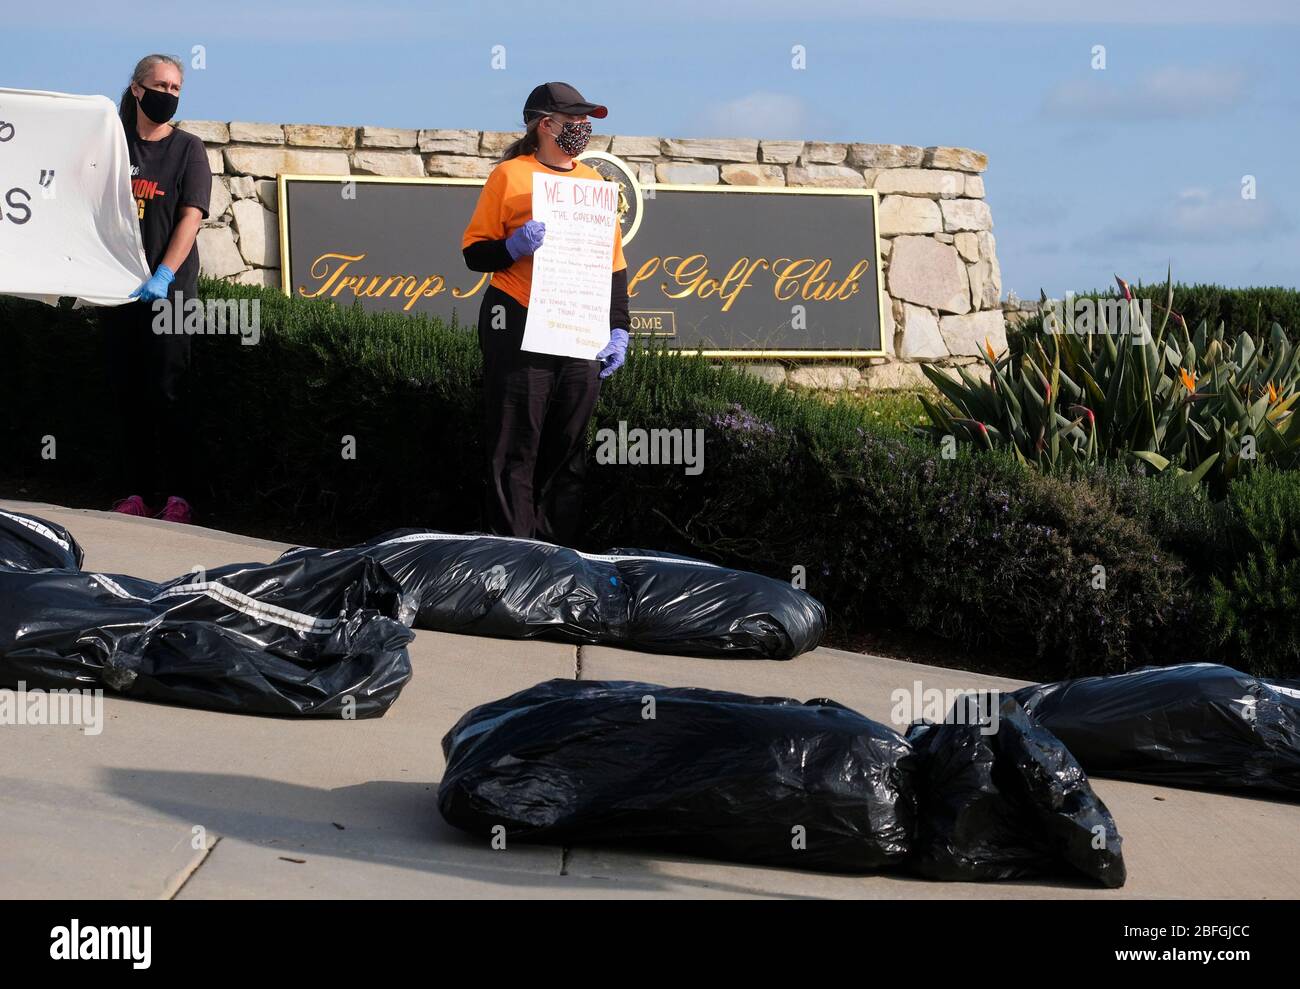 Los Angeles, California, USA. 18th Apr, 2020. Demonstrators stand as fake body bags are placed at outside Trump National Golf Club Los Angeles in protest against U.S. President Donald Trump's response to the coronavirus disease (COVID-19) pandemic, in Rancho Palos Verdes, California, April 18, 2020. Credit: Ringo Chiu/ZUMA Wire/Alamy Live News Stock Photo